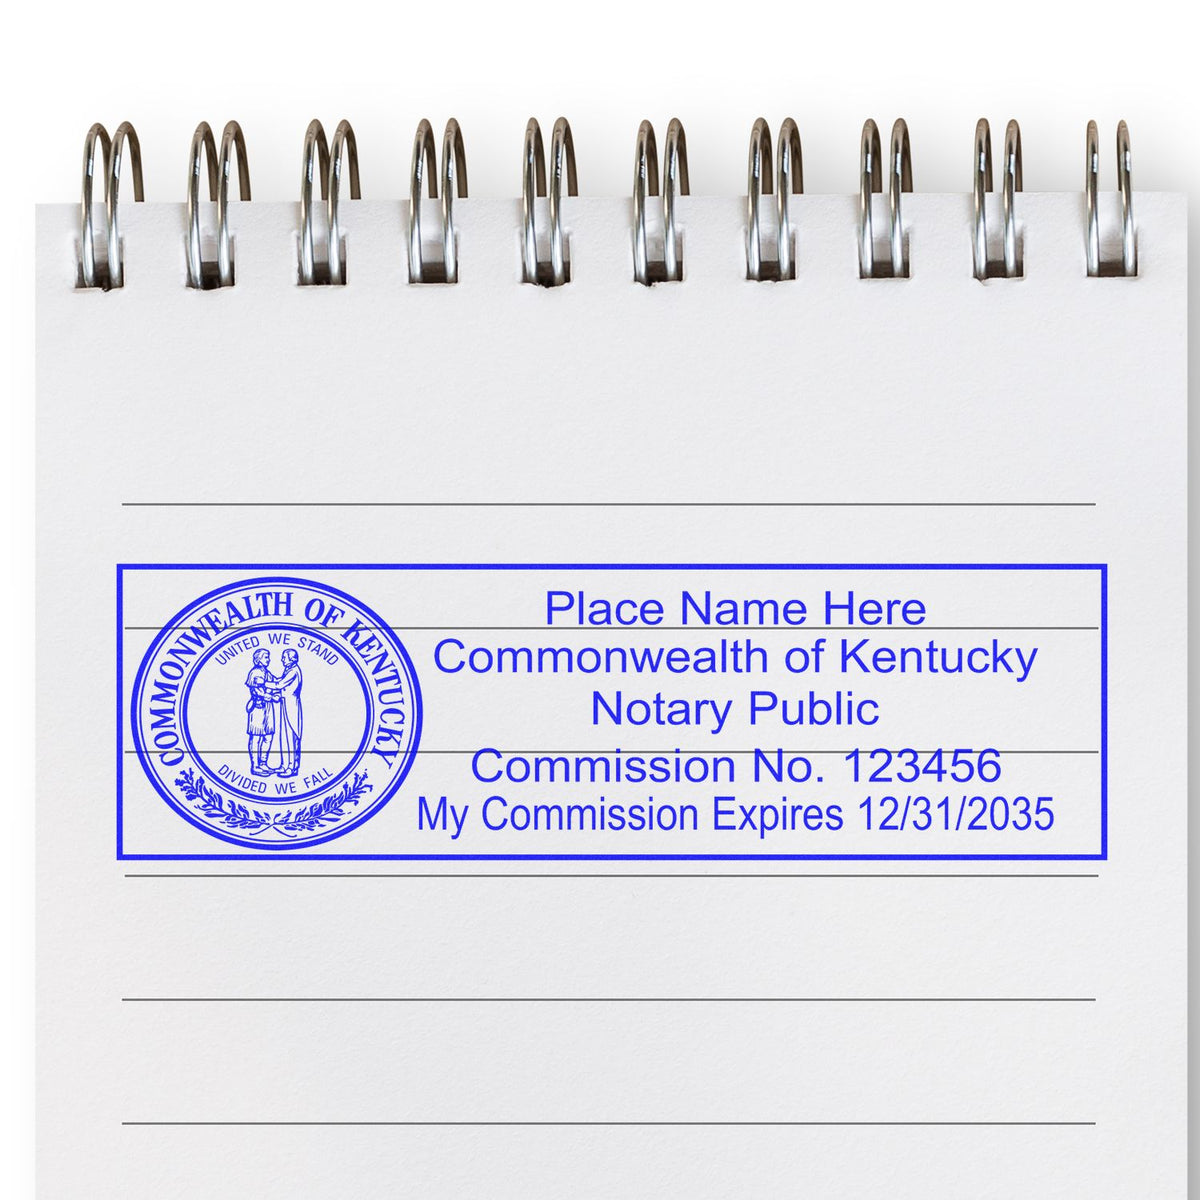 An alternative view of the Heavy-Duty Kentucky Rectangular Notary Stamp stamped on a sheet of paper showing the image in use